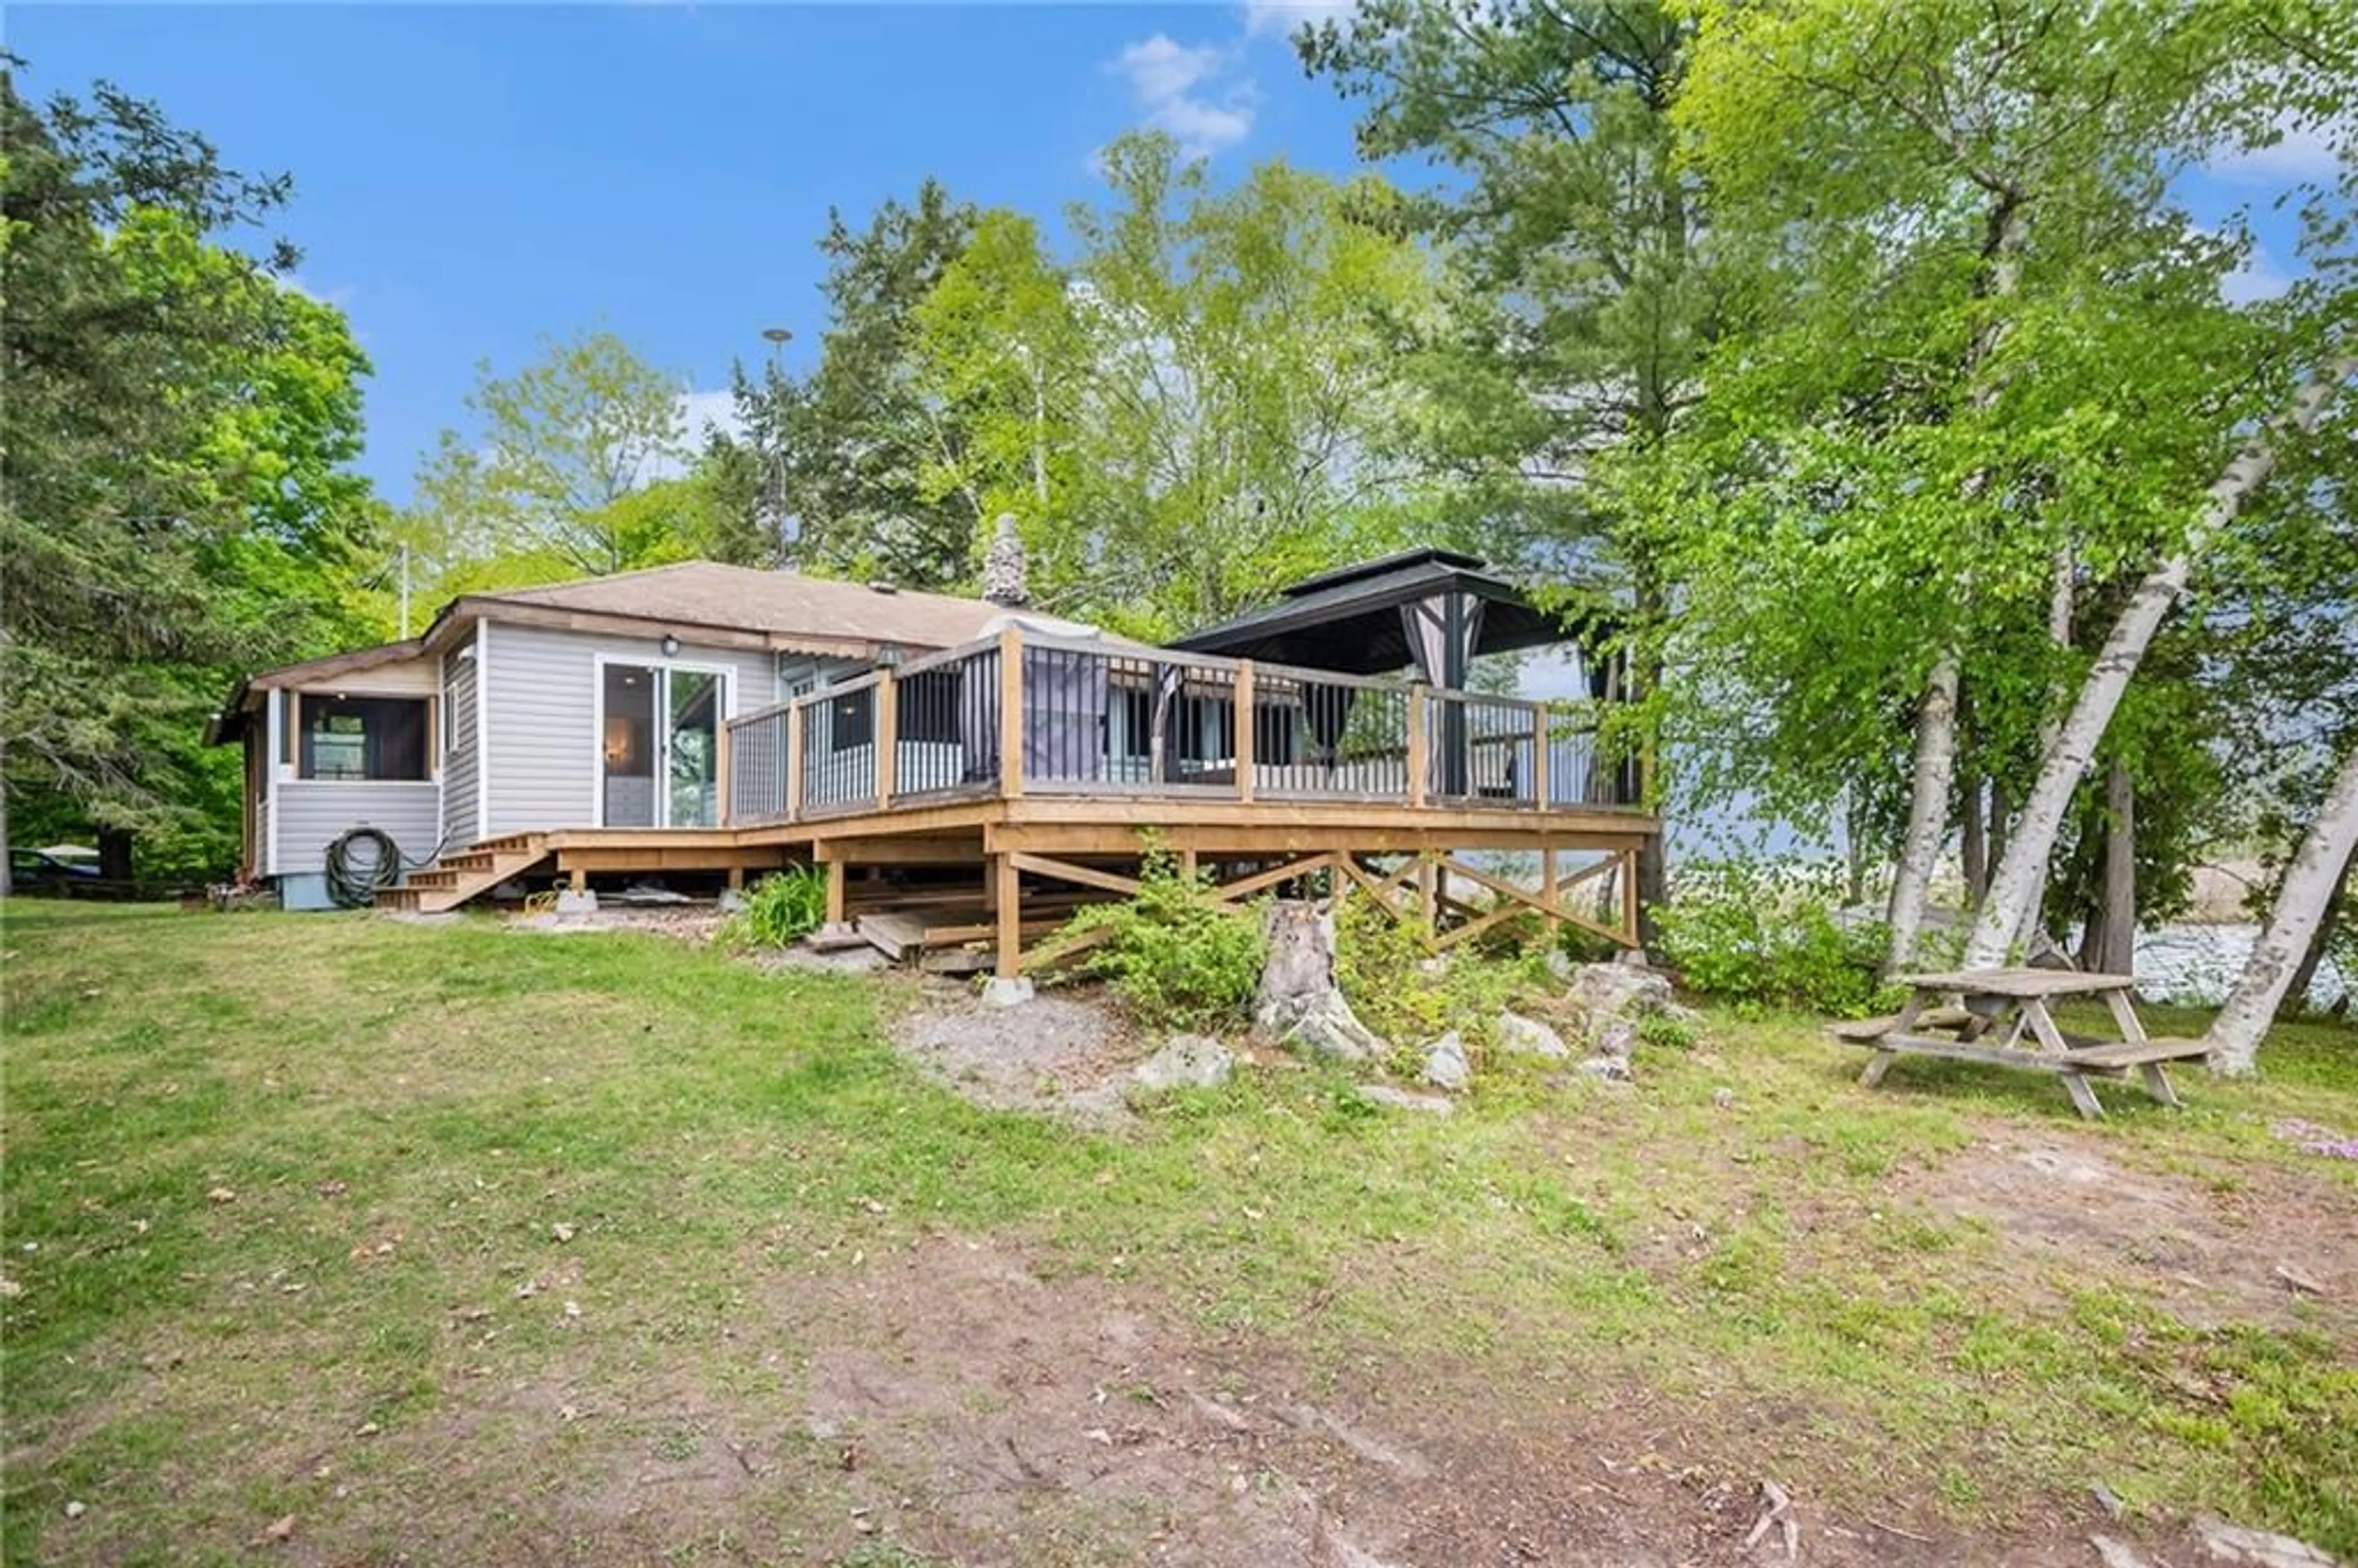 Cottage for 6 R2 Rd, Lombardy Ontario K0G 1L0